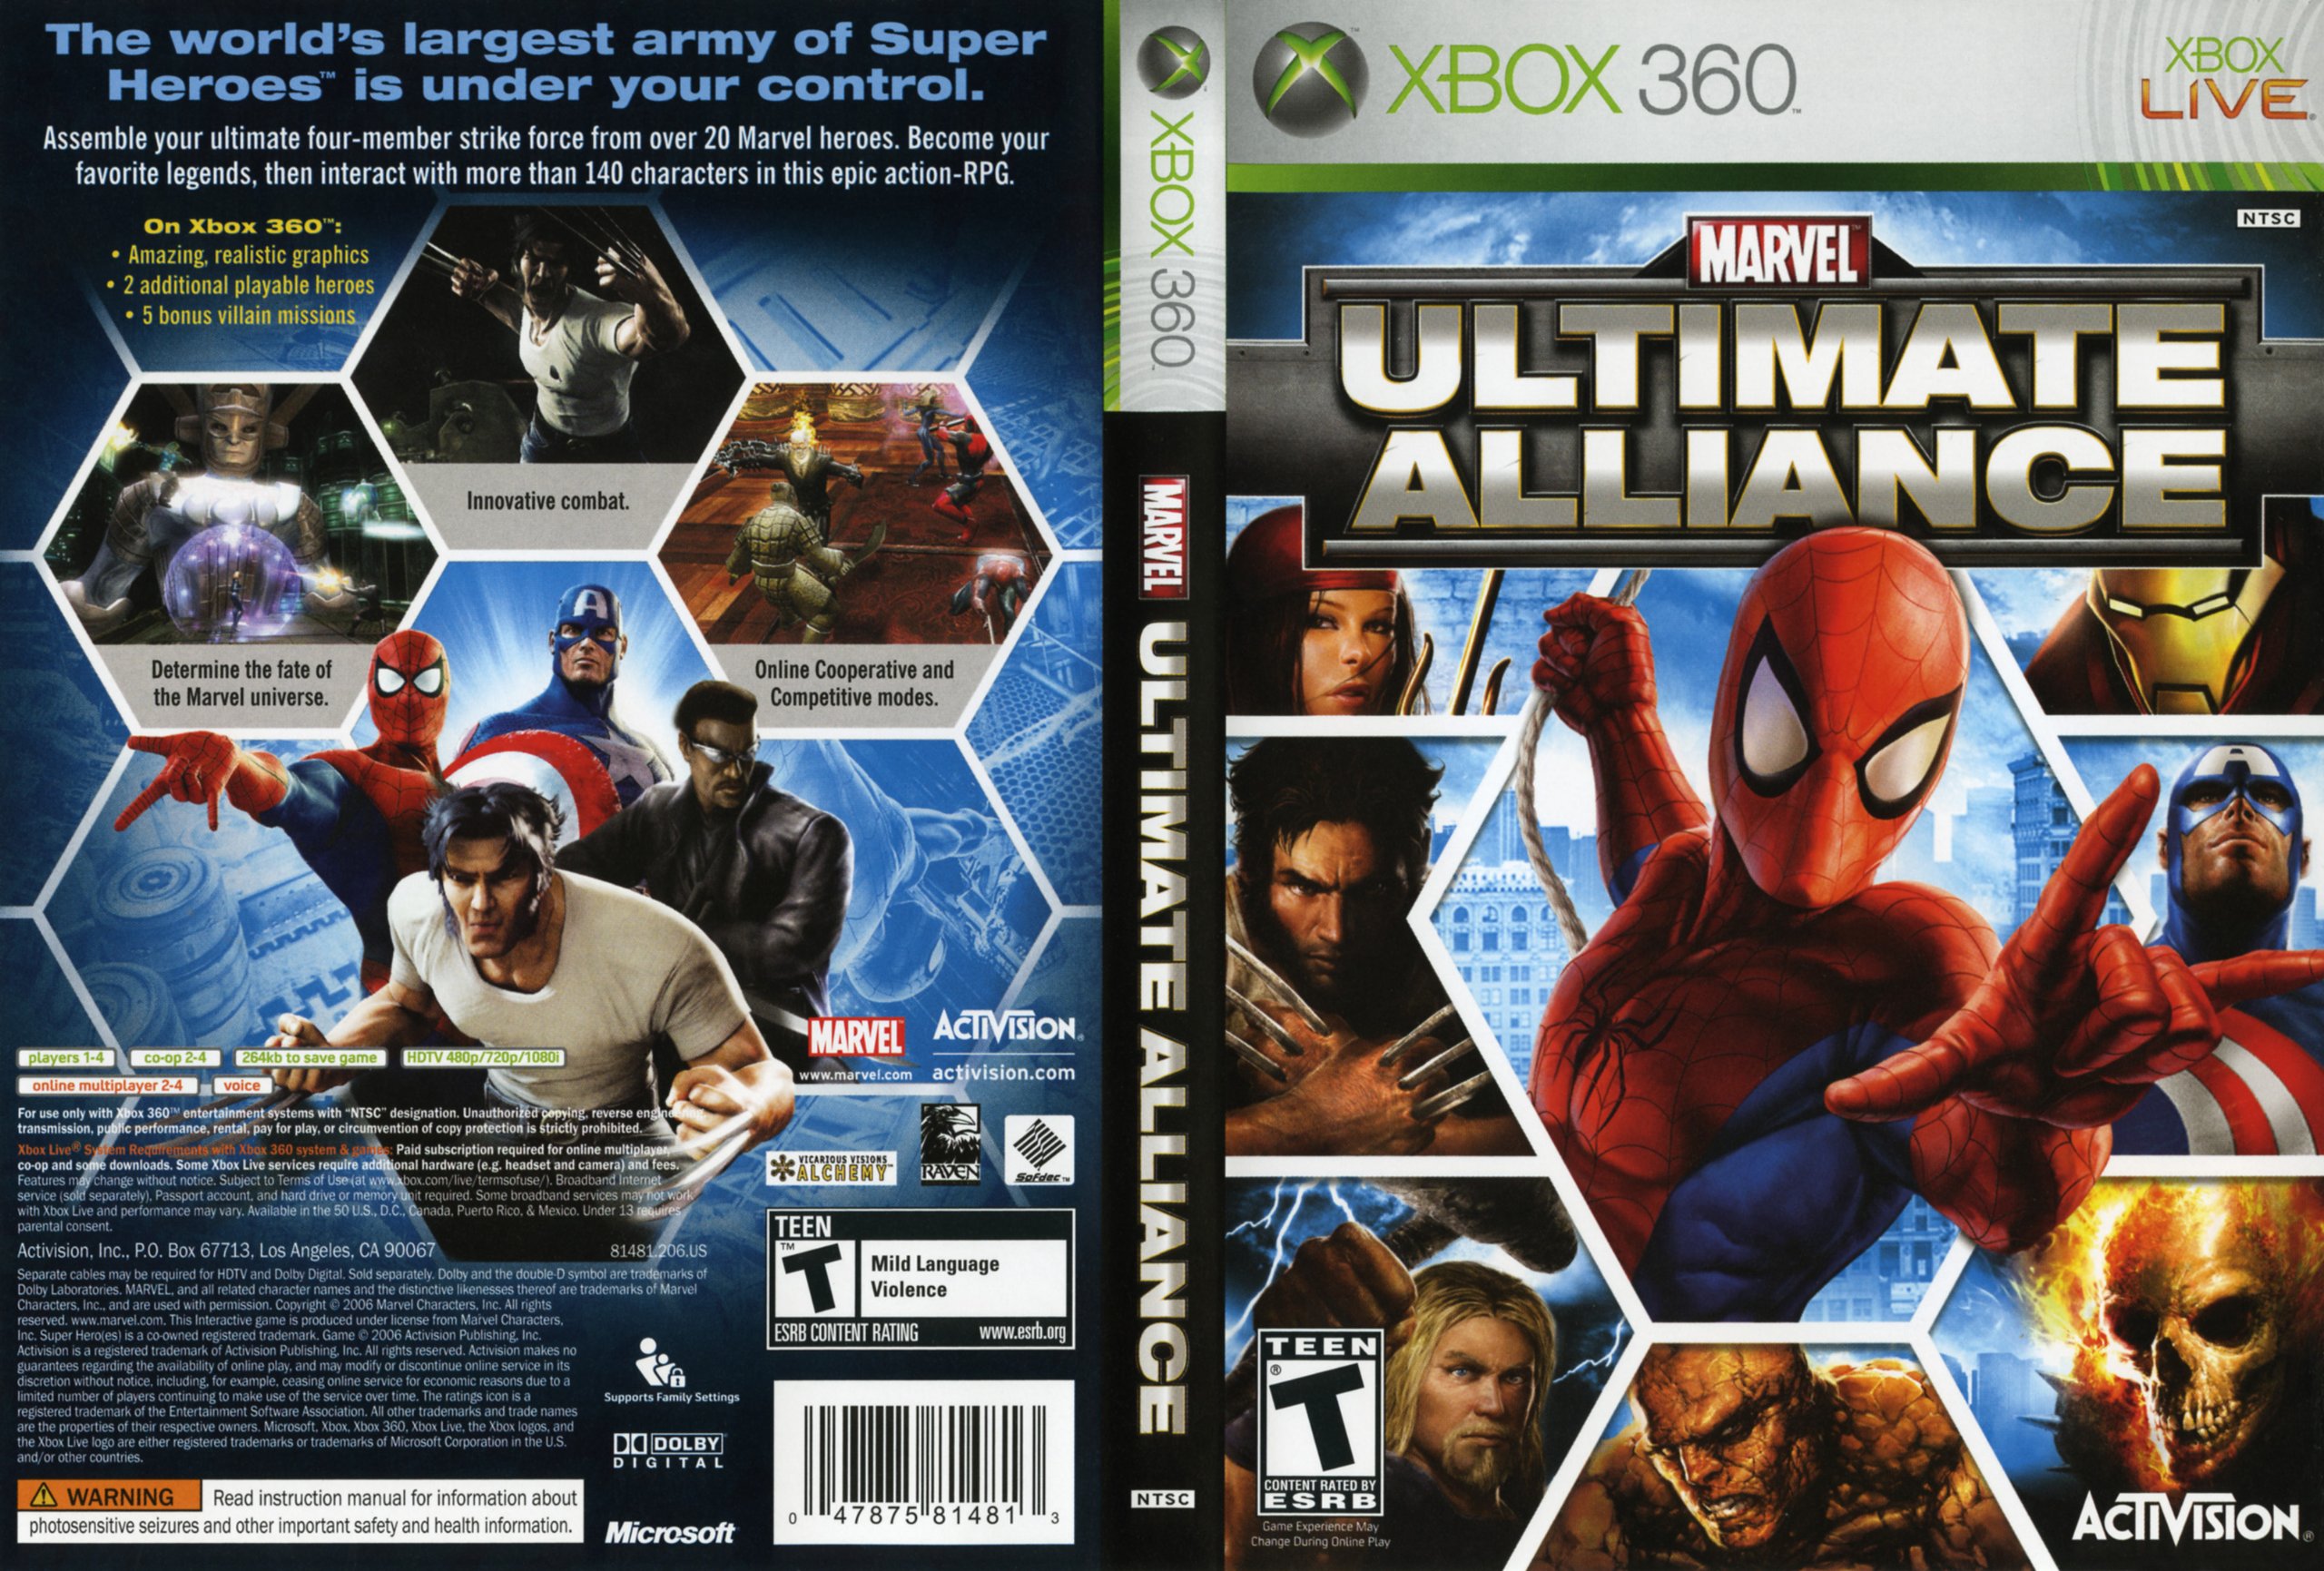 Marvel Ultimate Alliance Pics, Video Game Collection